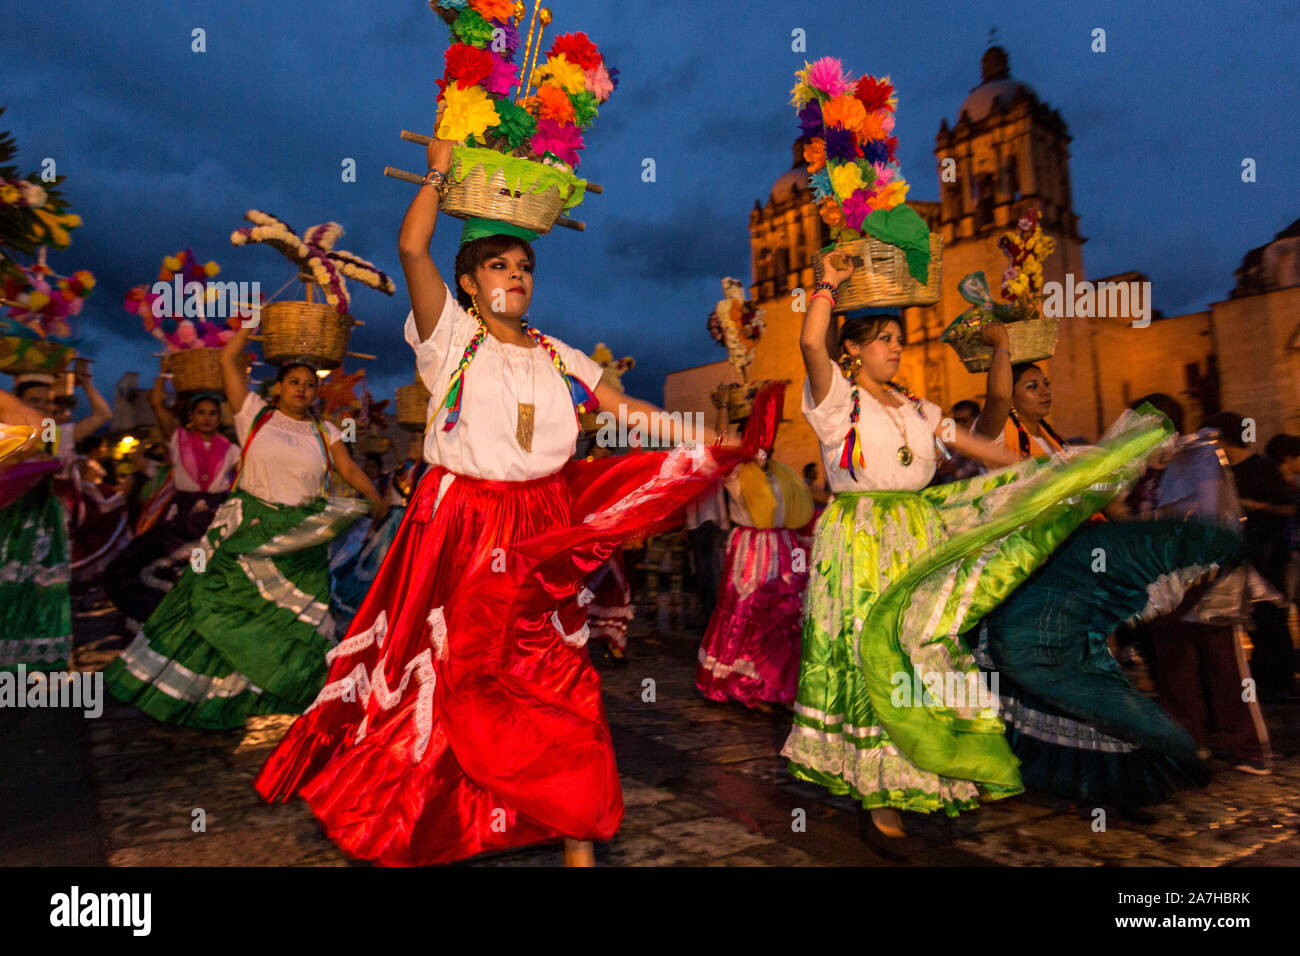 Young women dressed in traditional costumes perform the Flor de Pina dance in a comparsas past the Santo Domingo de Guzmán Church during the Day of the Dead Festival known in Spanish as Día de Muertos on November 2, 2013 in Oaxaca, Mexico. Stock Photo